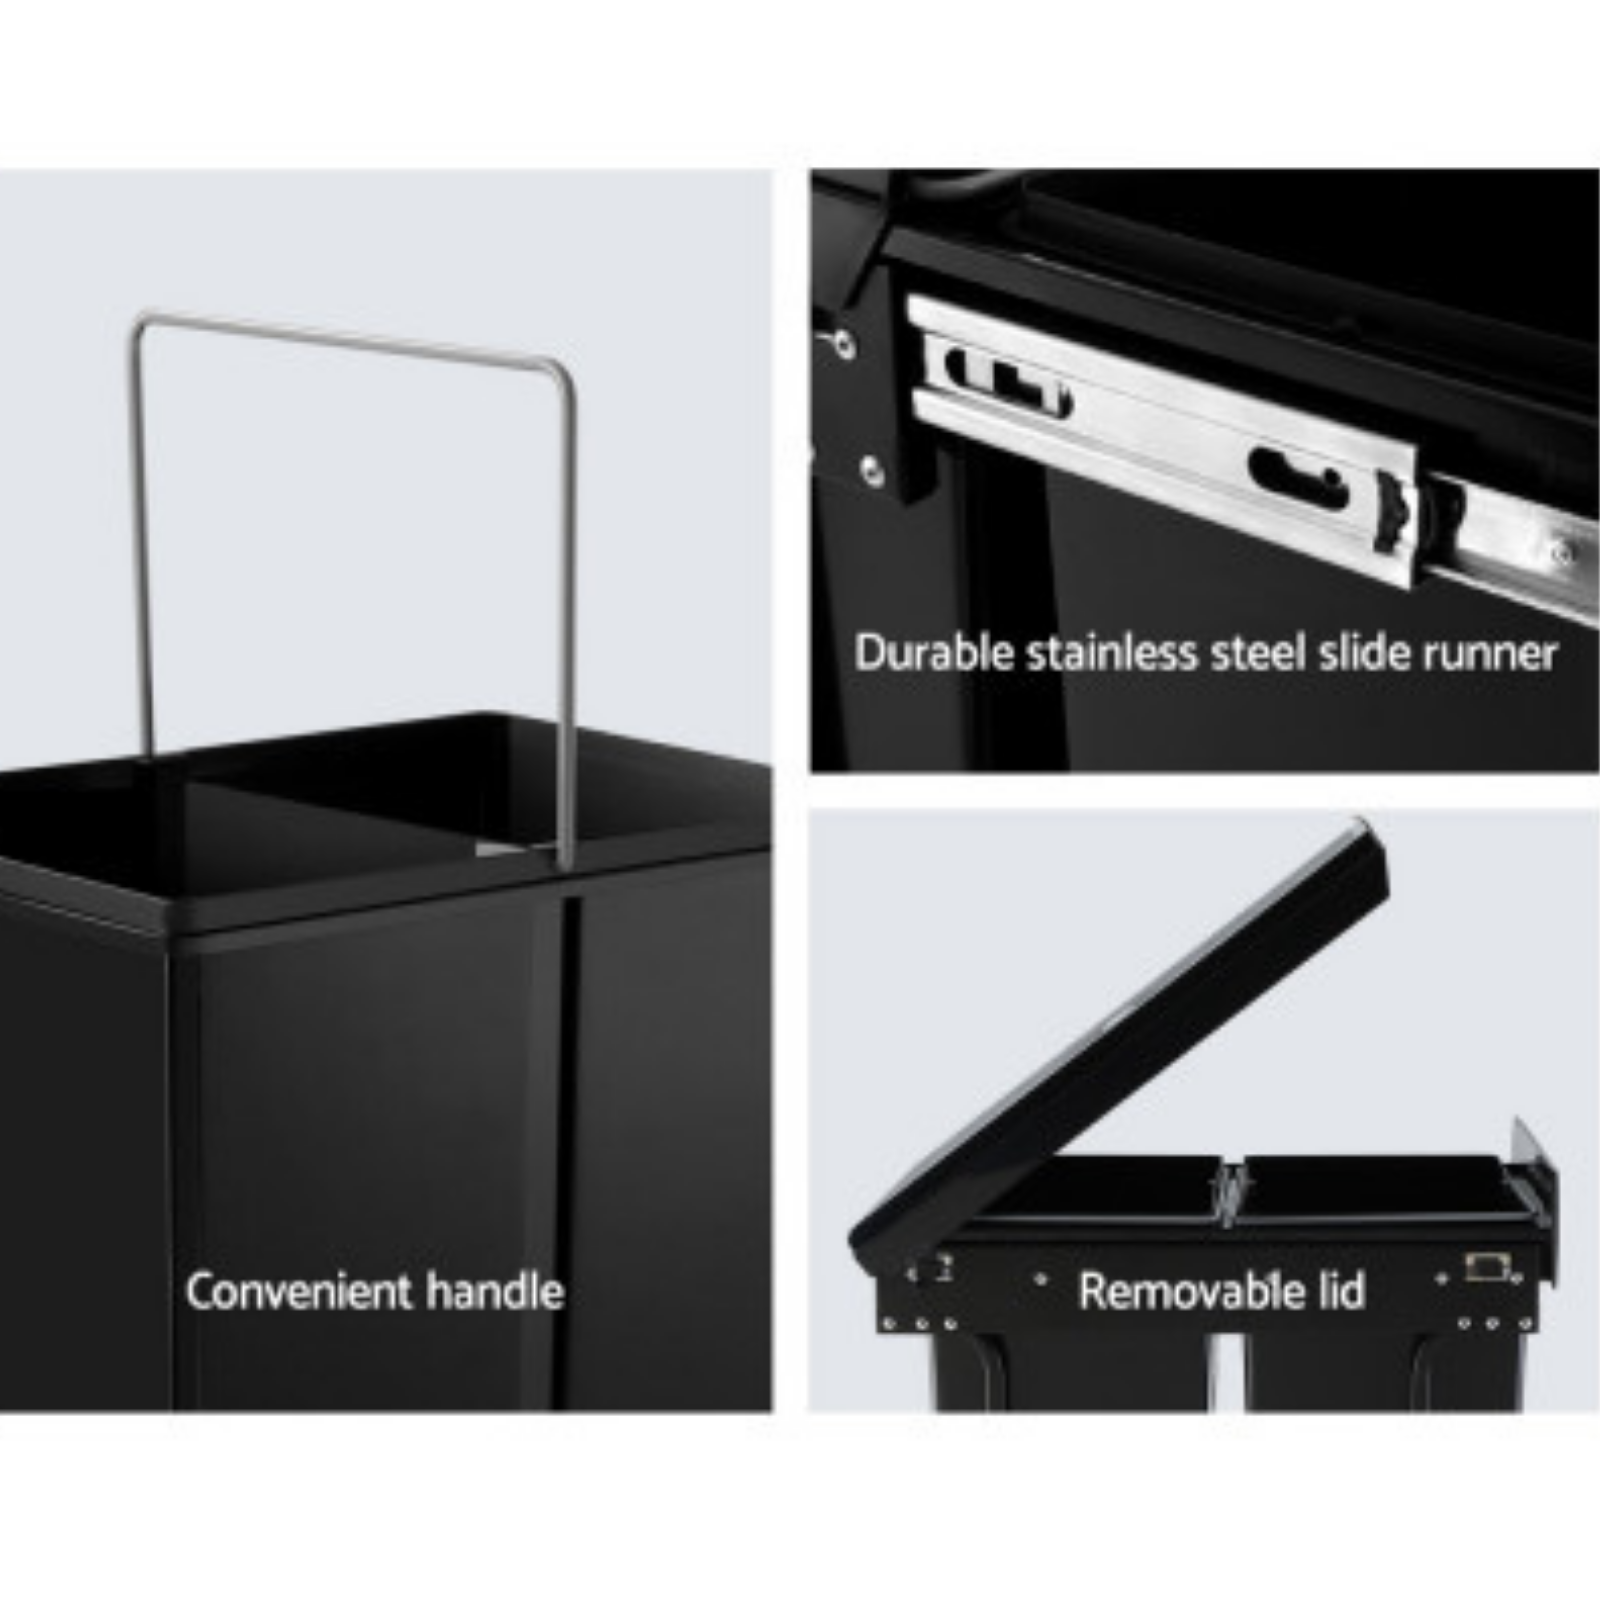 Cefito Dual Side Pull Out Bin has a removable lid, durable stainless steel slide runner & a convenient handle